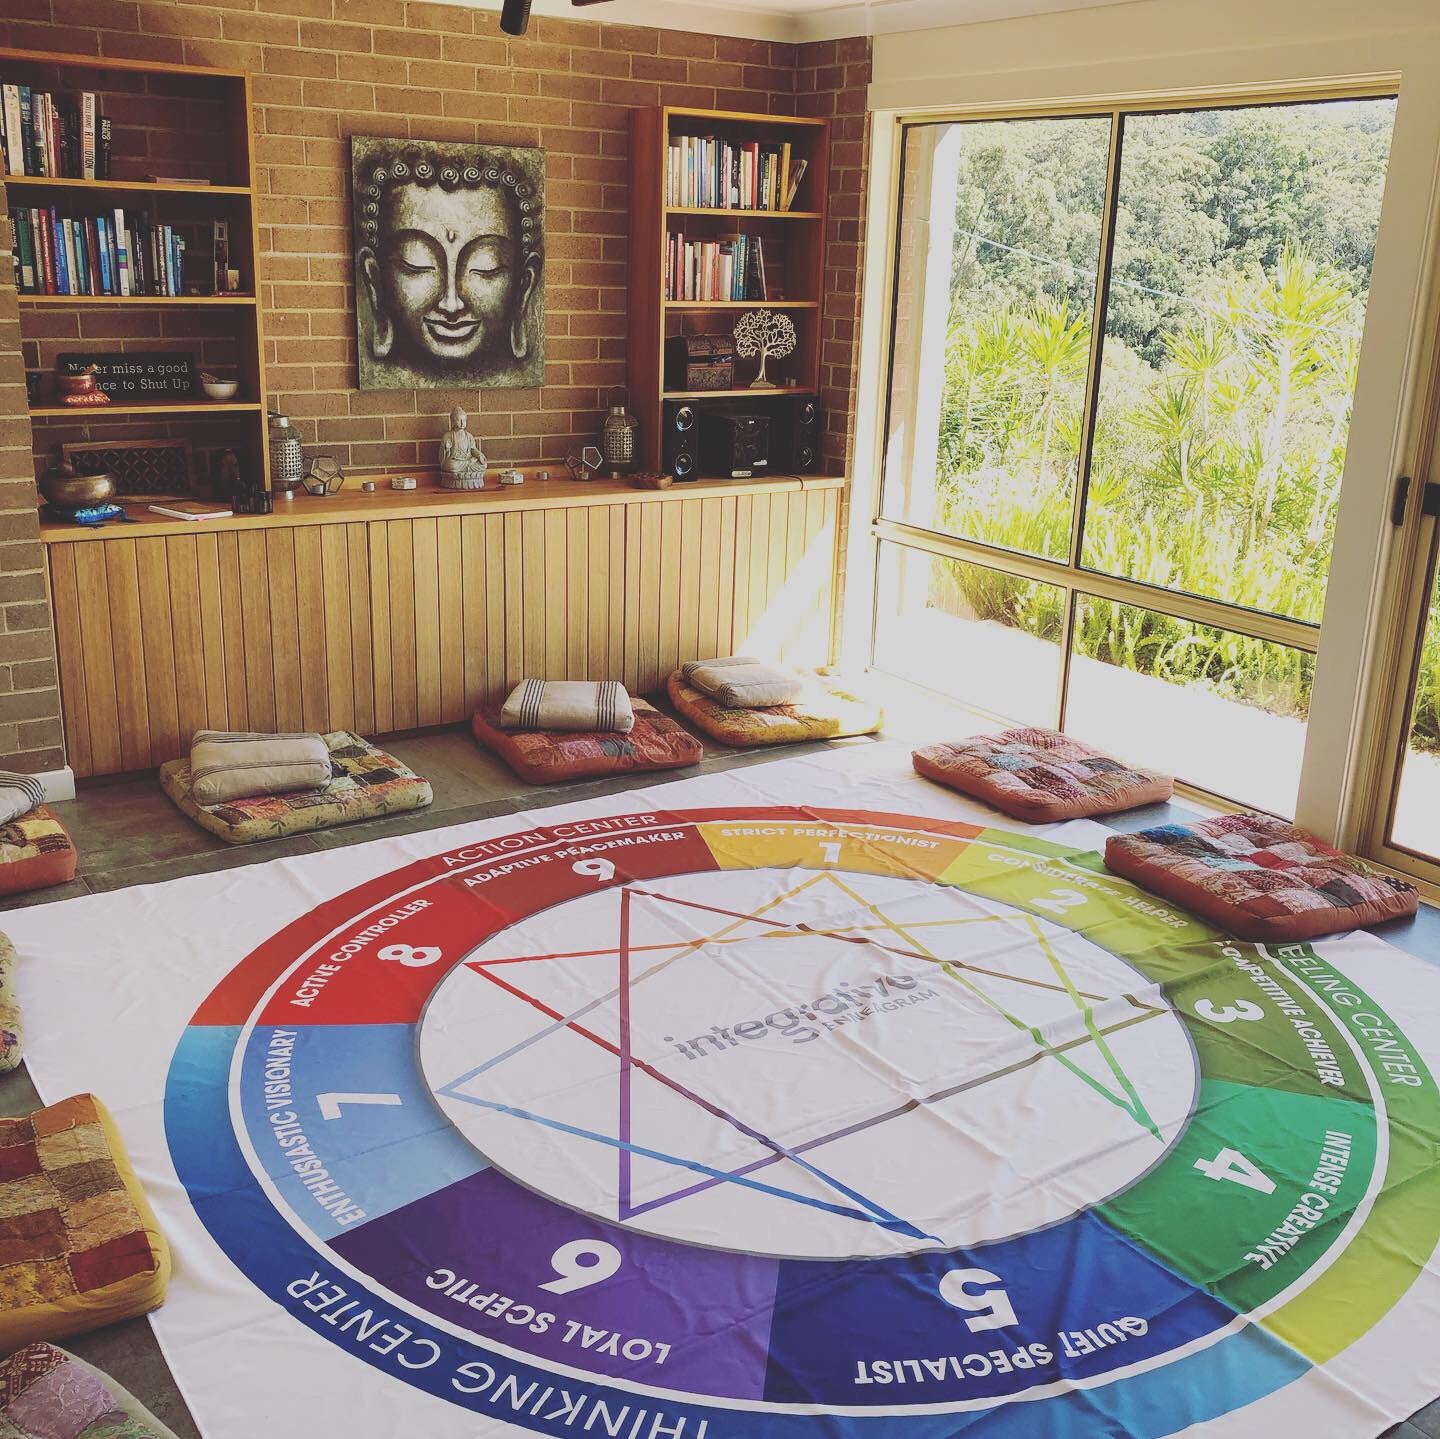 Fully Booked - 'Explore Yourself & Free Yourself' - One day Enneagram Retreat at Kodama - Sun Aug 9th 2020